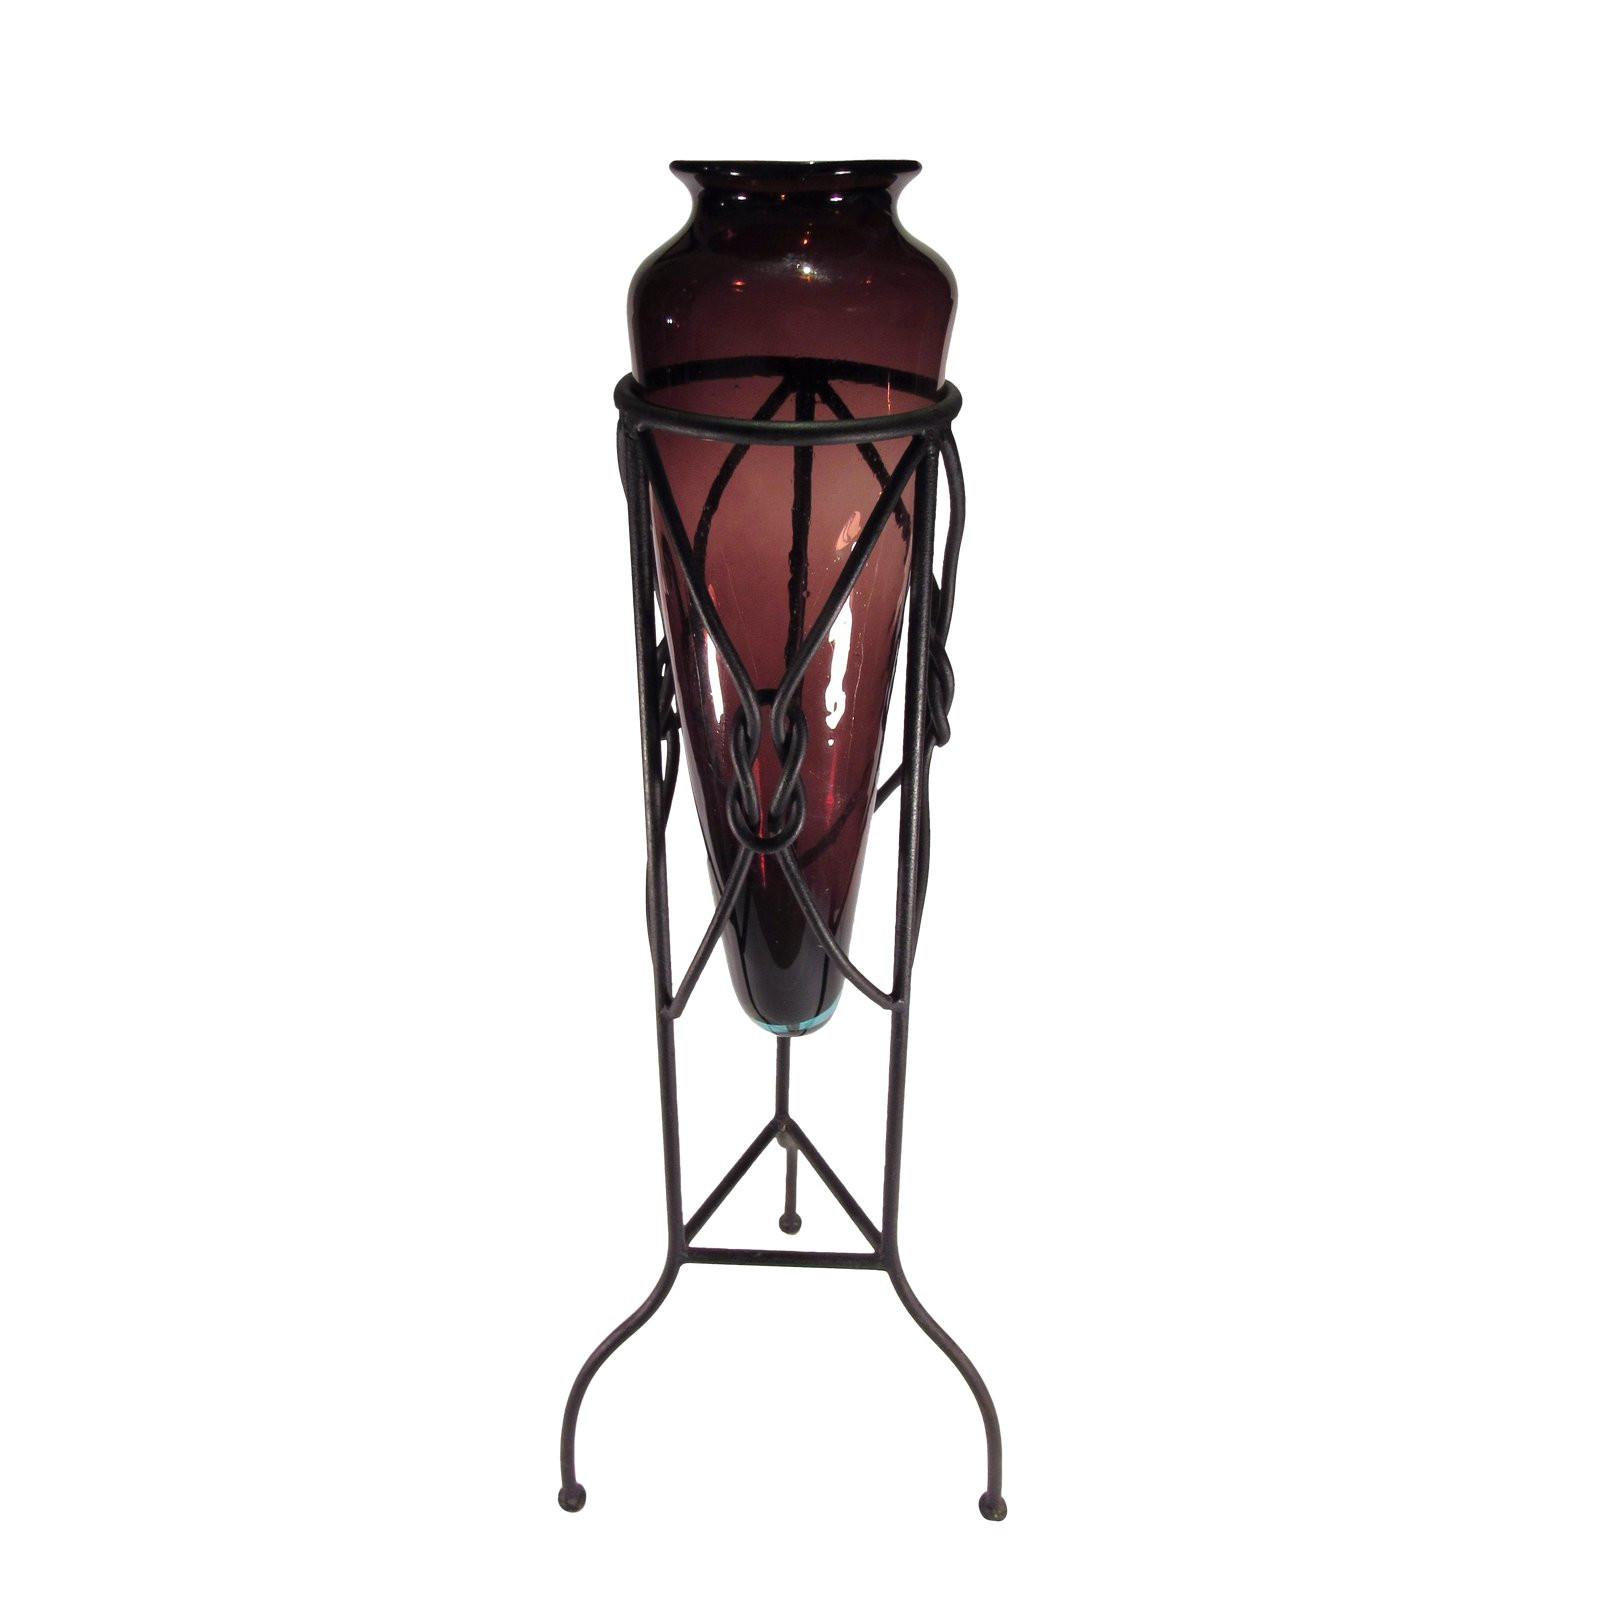 29 attractive Large Glass Hurricane Vase 2024 free download large glass hurricane vase of large amphora style glass vase in iron tripod stand chairish with regard to large amphora style glass vase in iron tripod stand 8677